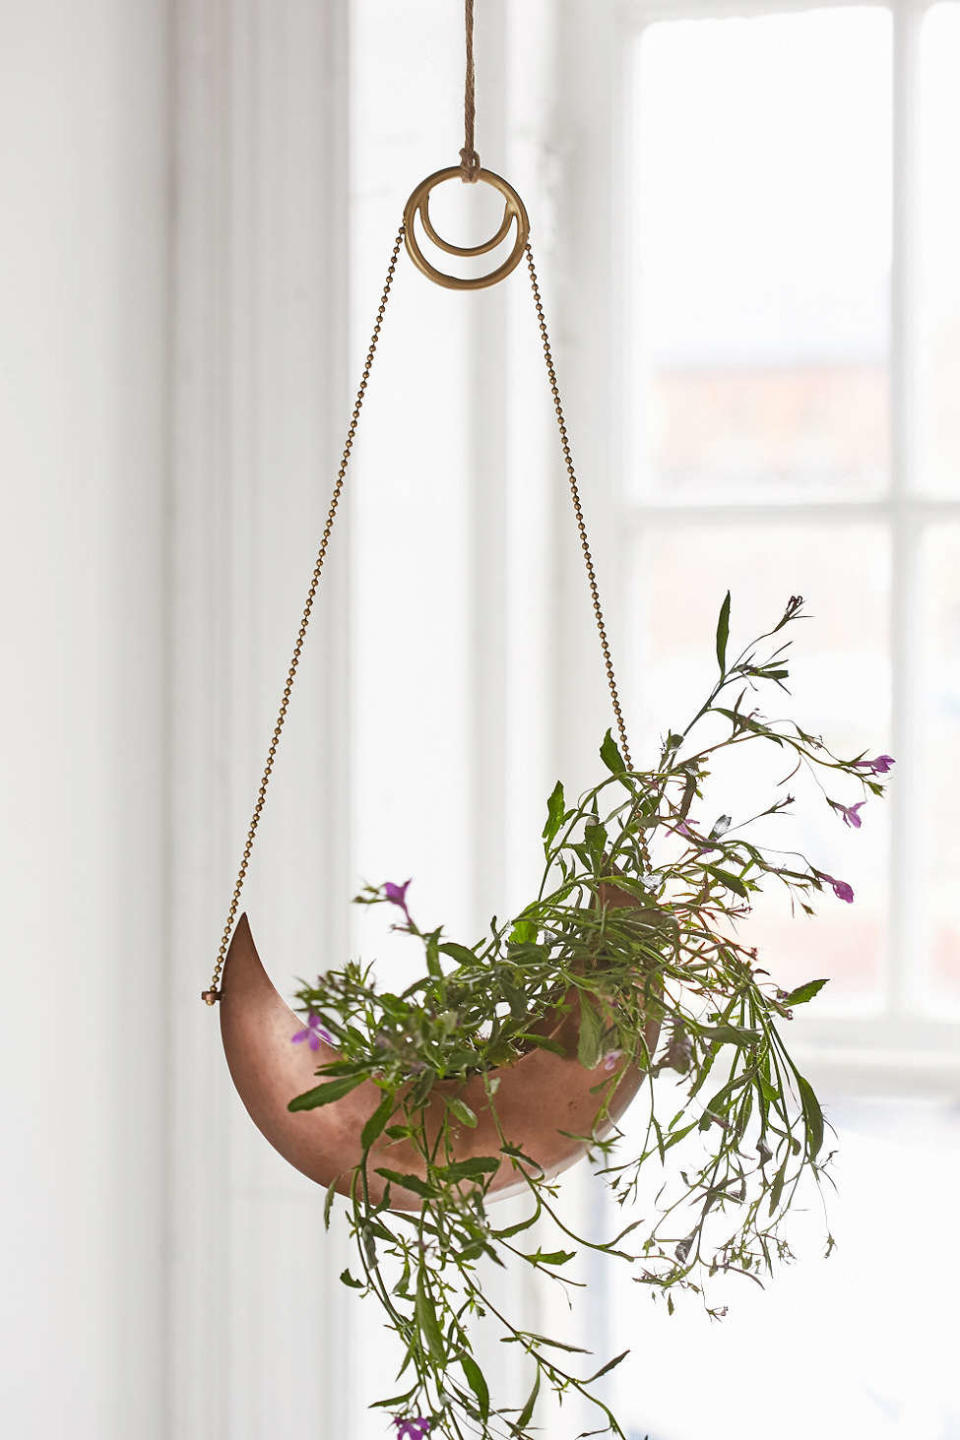 Crescent Hanging Planter, $24 at <a href="http://www.urbanoutfitters.com/urban/catalog/productdetail.jsp?id=35697515&amp;category=A_FURN_PRETTY" target="_blank">Urban Outfitters</a>